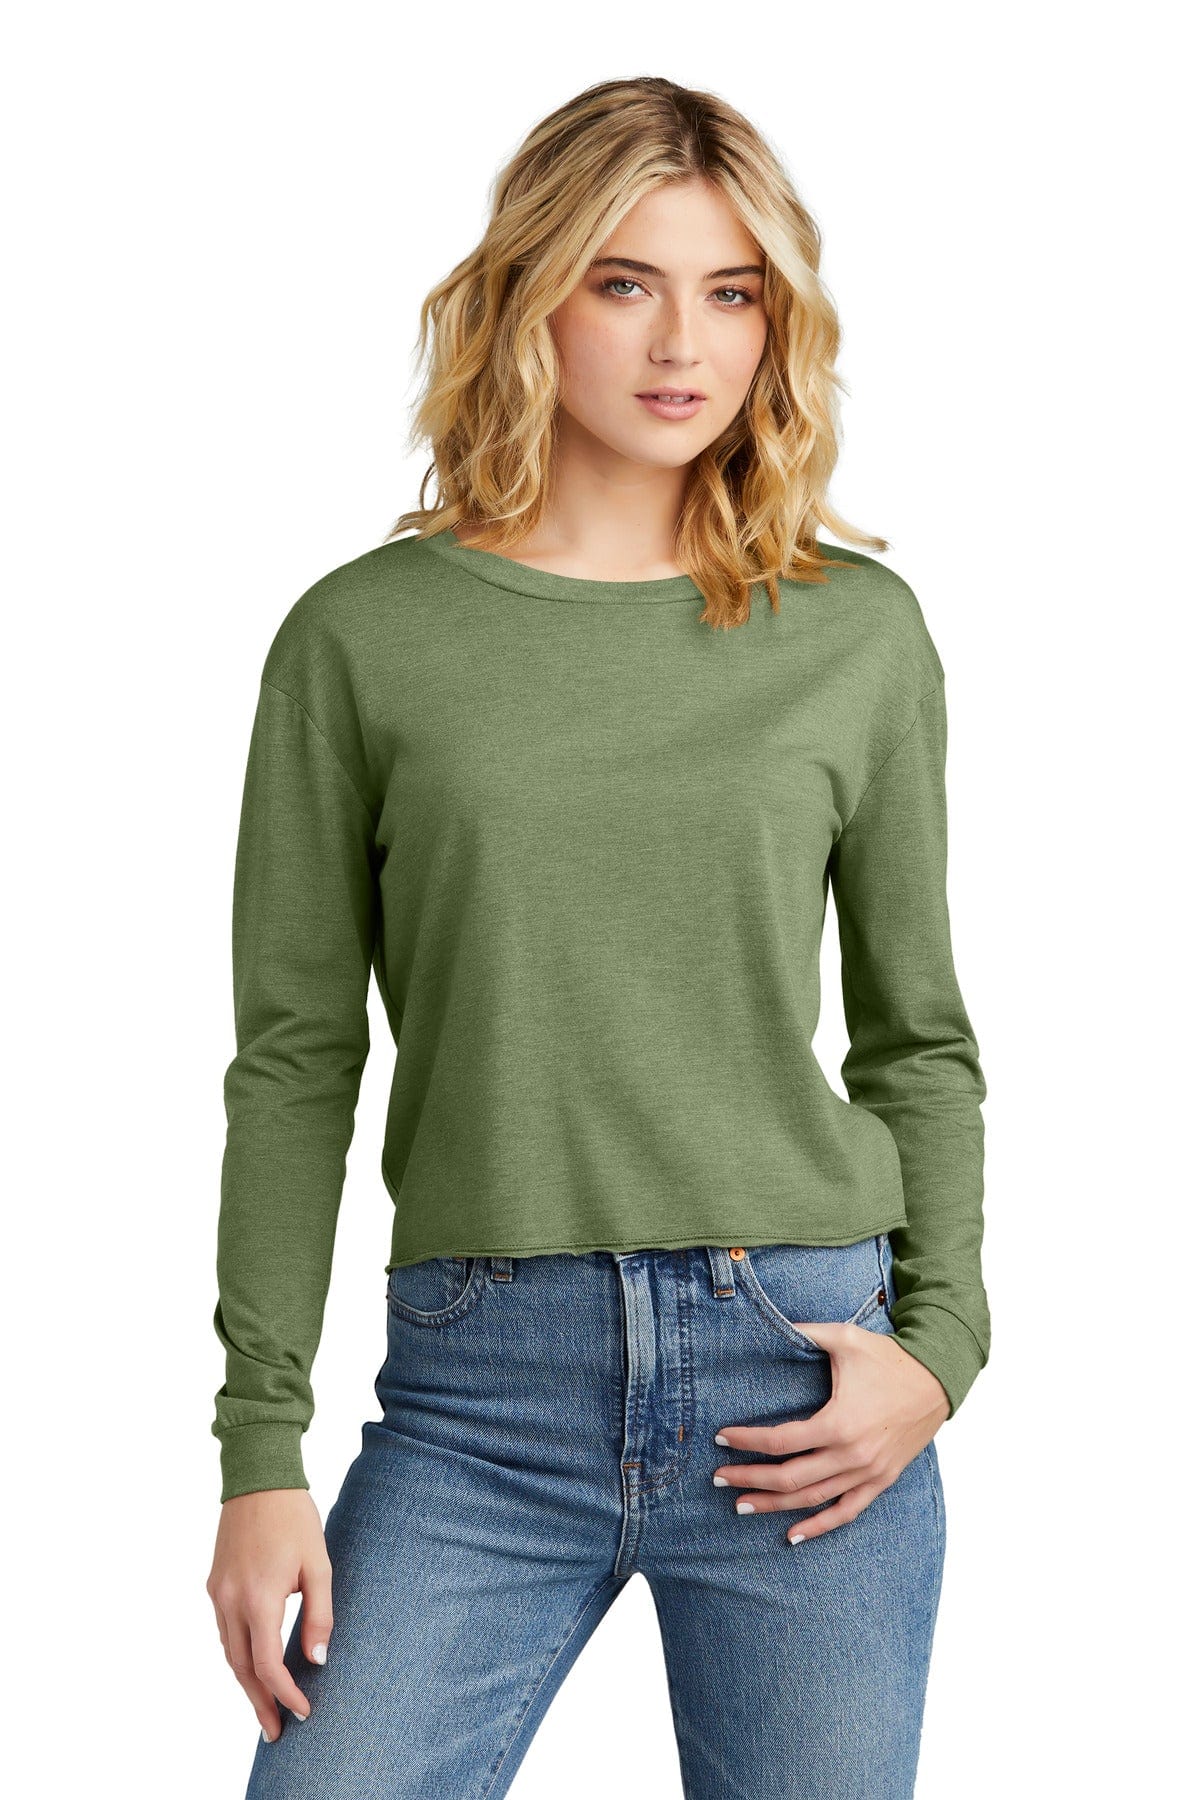 District ® Women's Perfect Tri ® Midi Long Sleeve Tee DT141